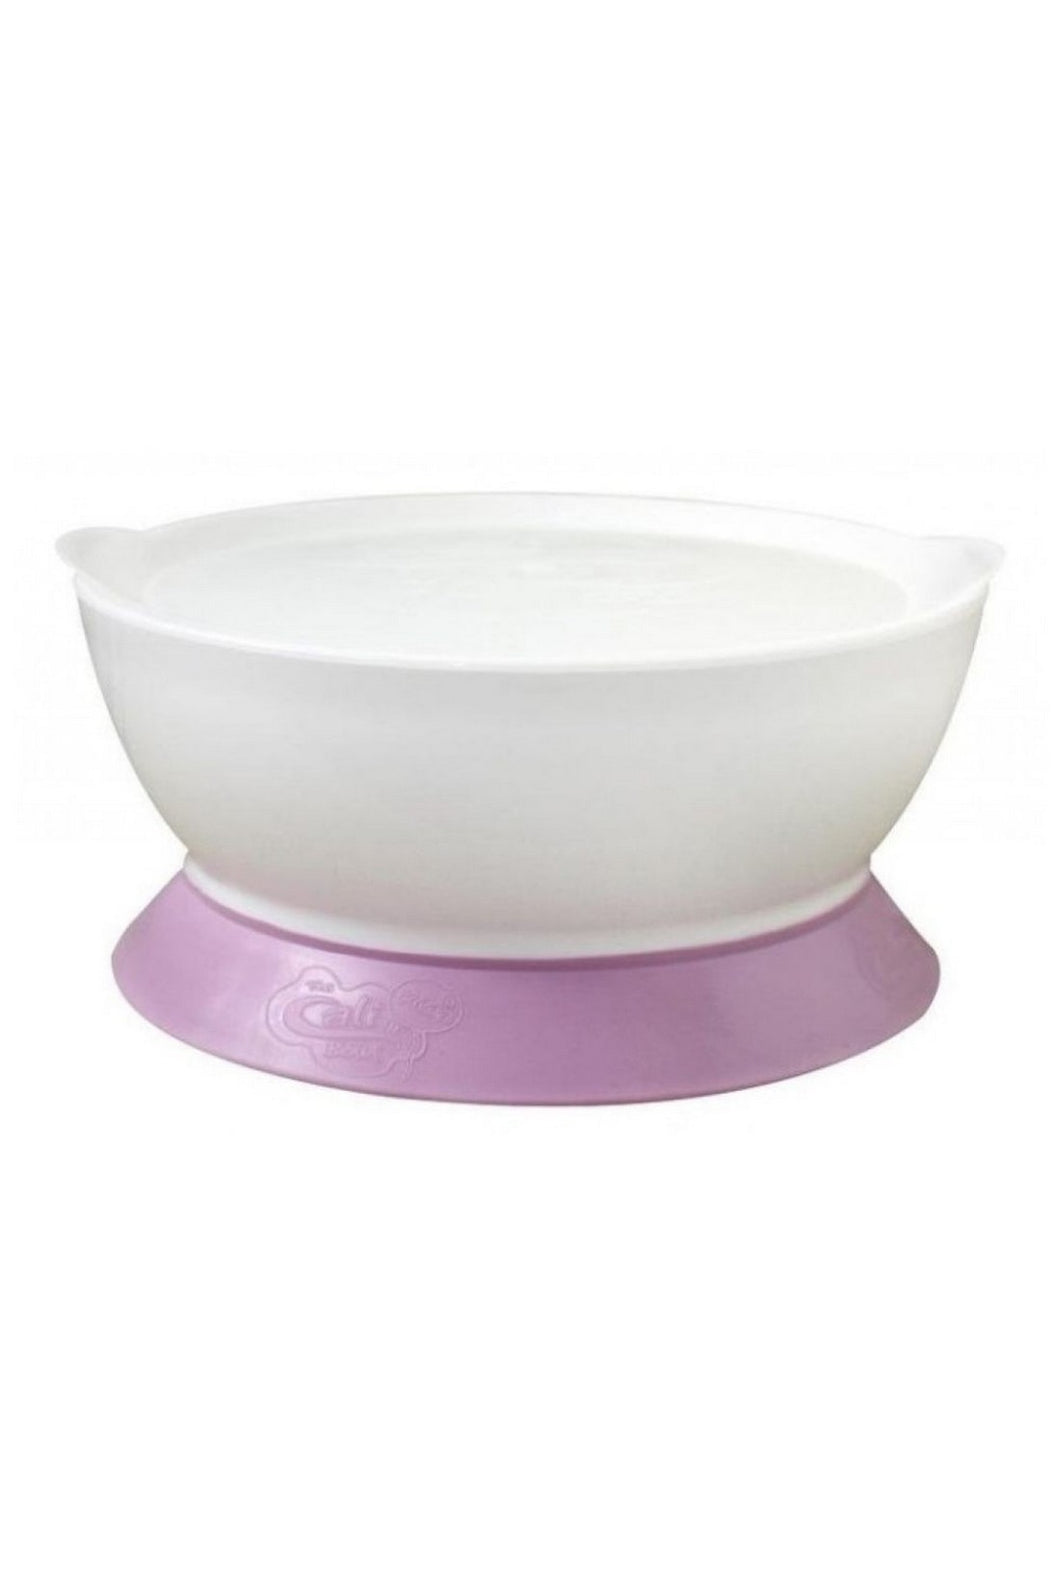 CaliBowl 12oz Suction Bowl with Lid 3